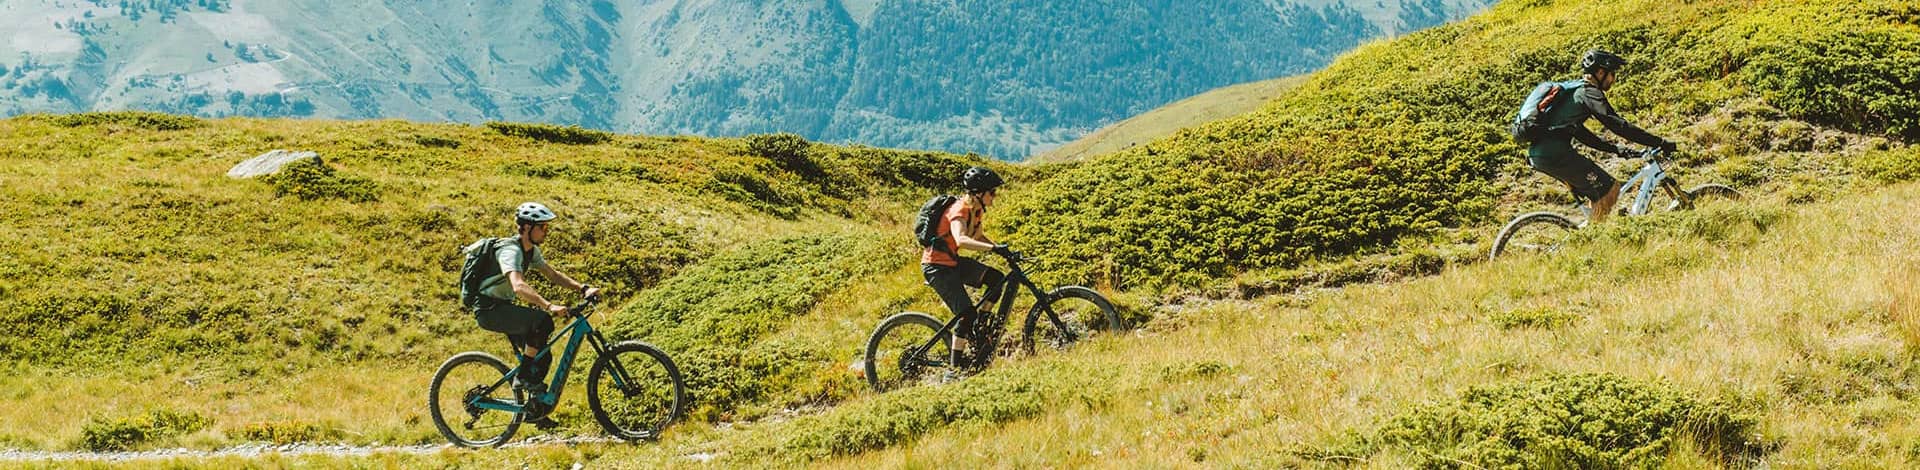 Start mountain biking in Les 3 Vallées with the 3-hour initiation pass